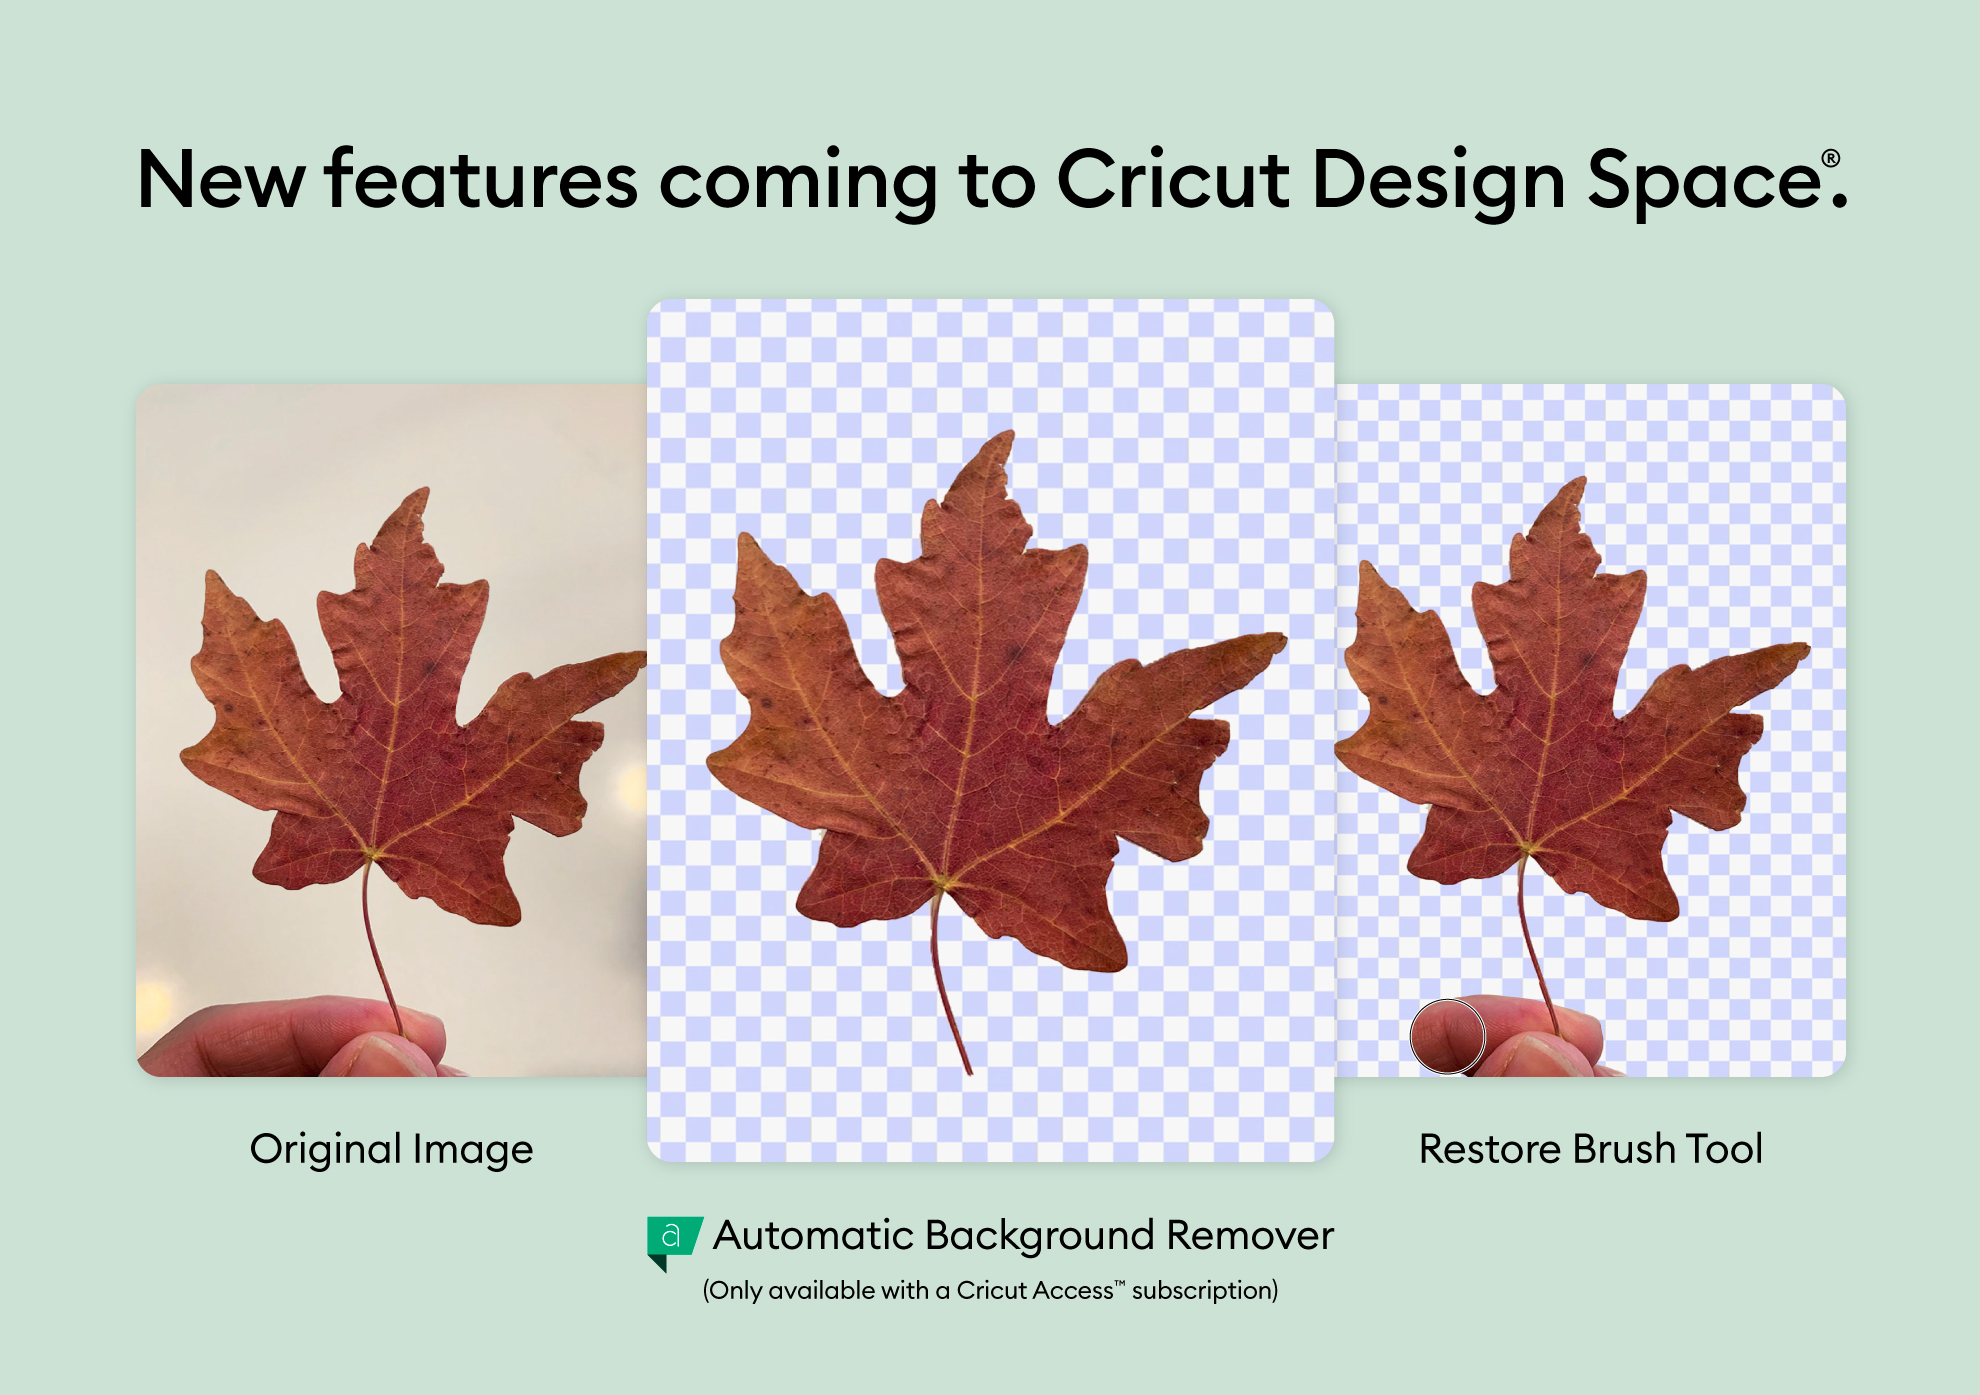 New in Design Space: Restore Brush and Automatic Background Remover